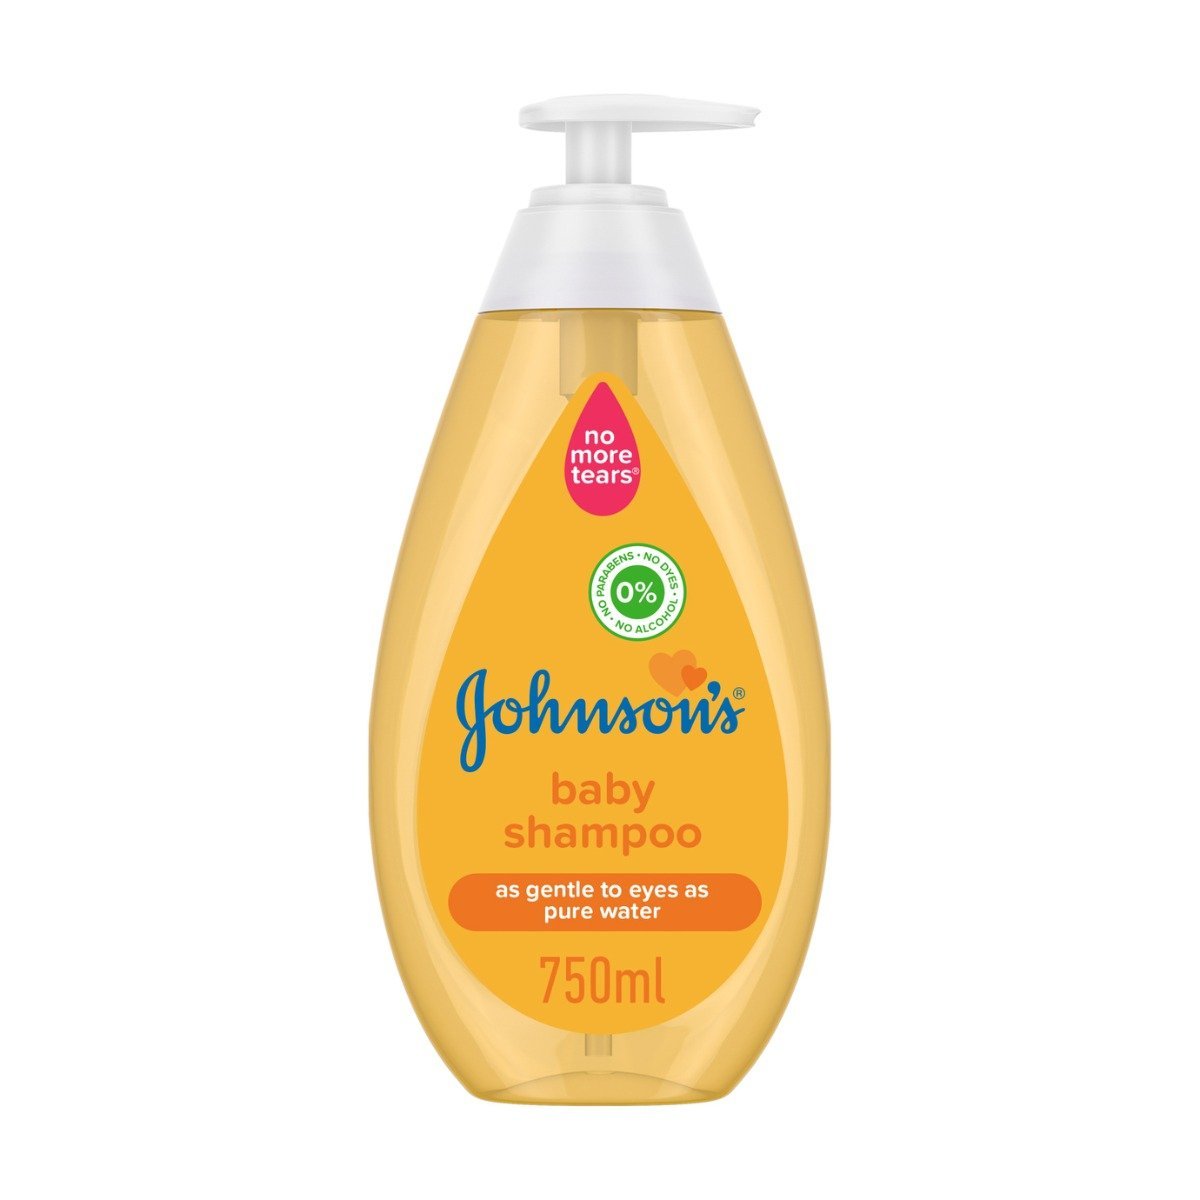 Johnsons As Gentle To Eyes as Pure Water Baby Shampoo - 750ml